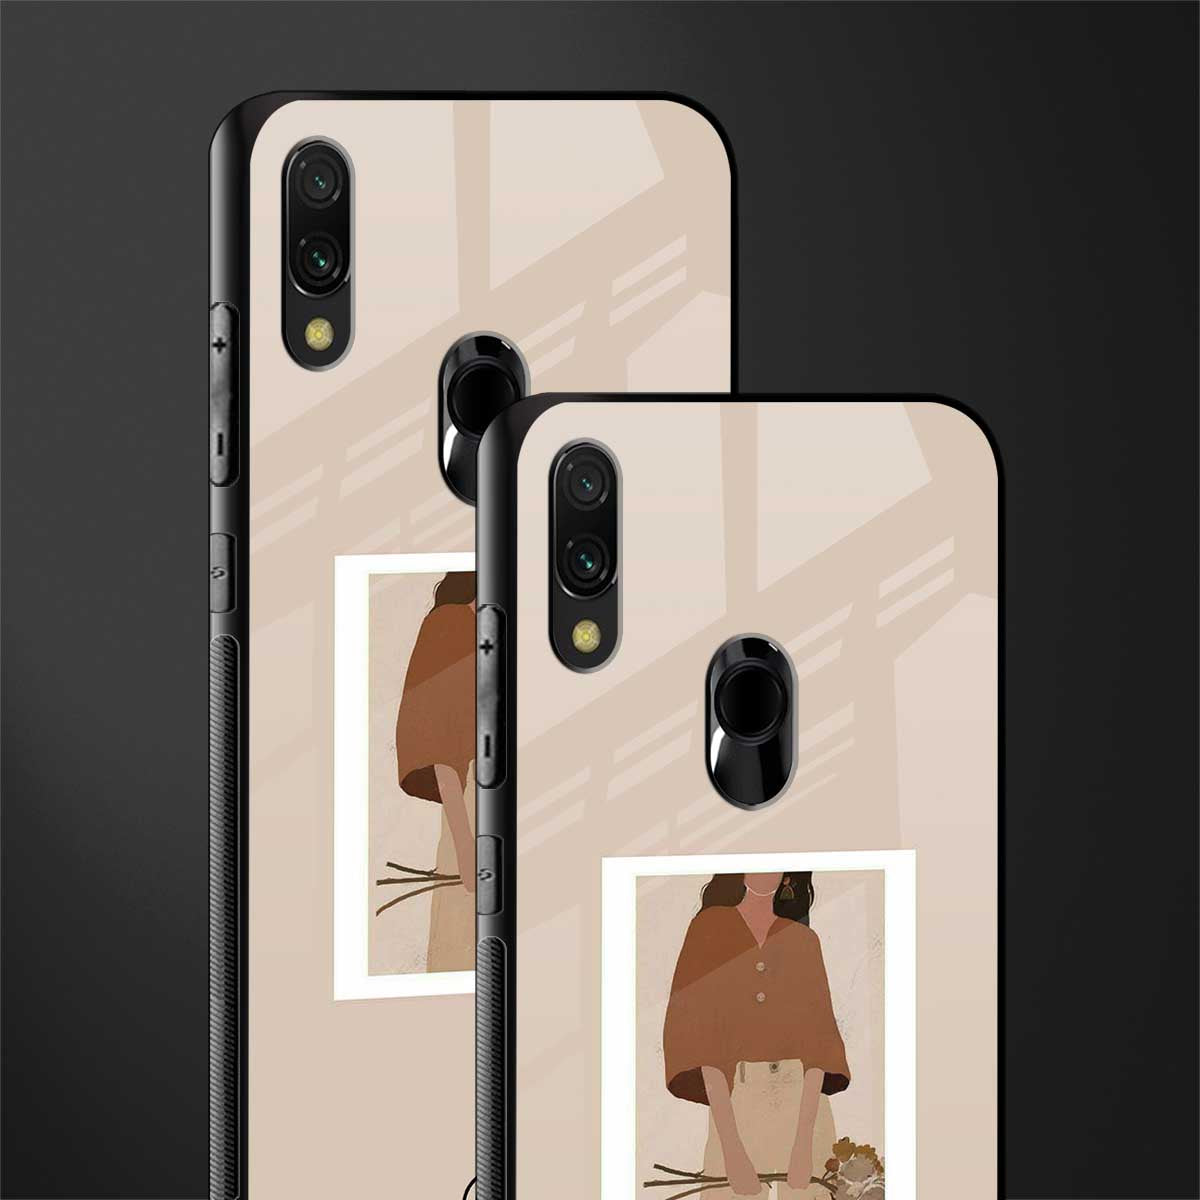 beige brown young lady art glass case for redmi 7redmi y3